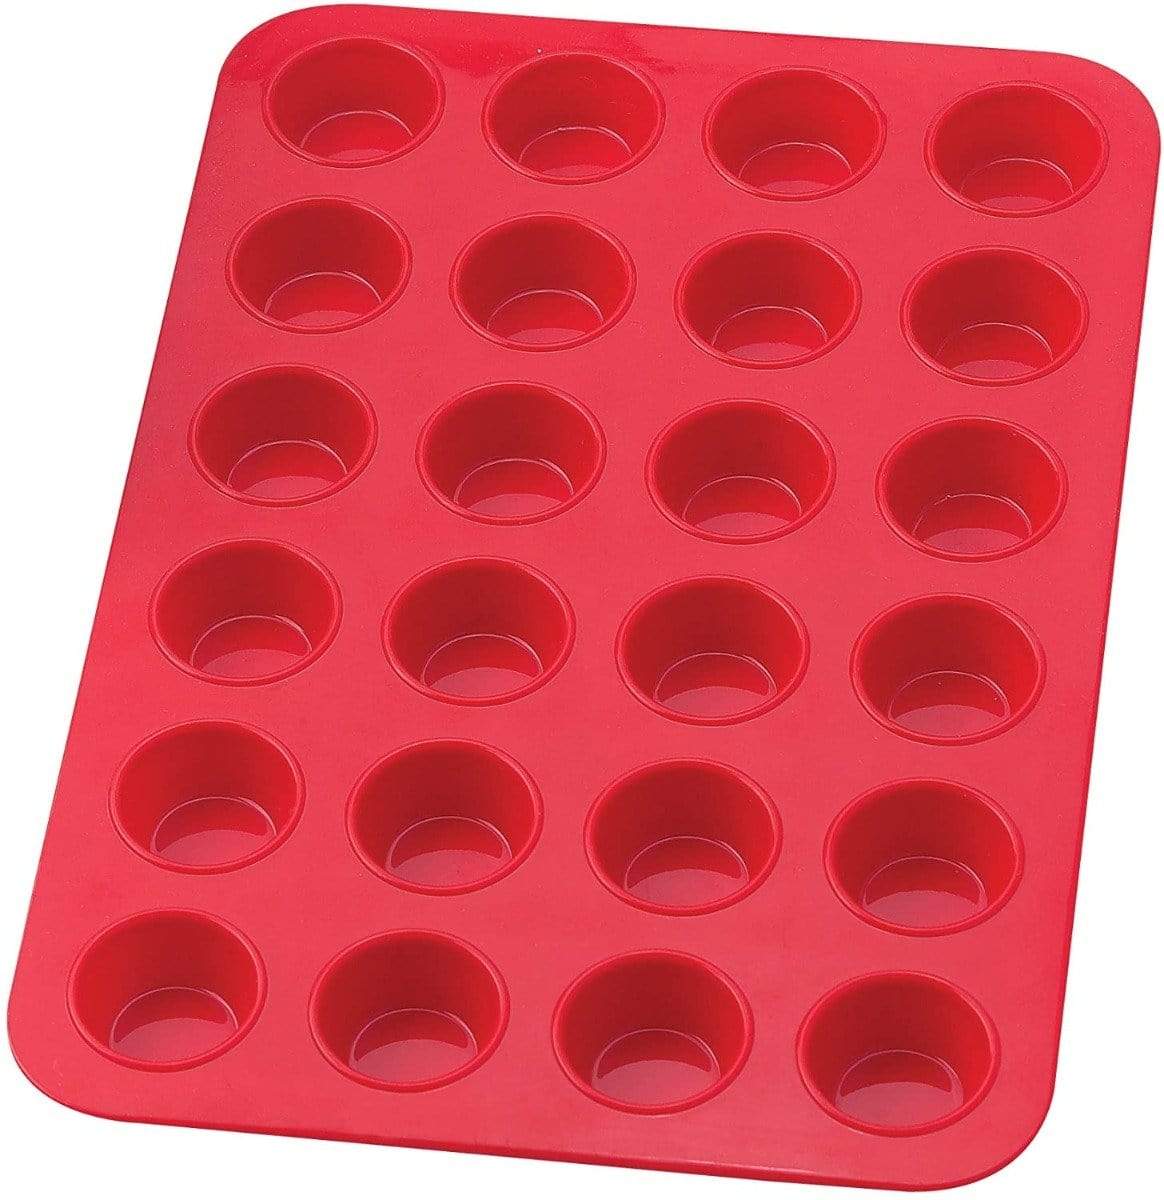 Mrs. Anderson's Cupcake & Muffin Pans Mrs. Anderson's Silicone Mini Muffin Pan